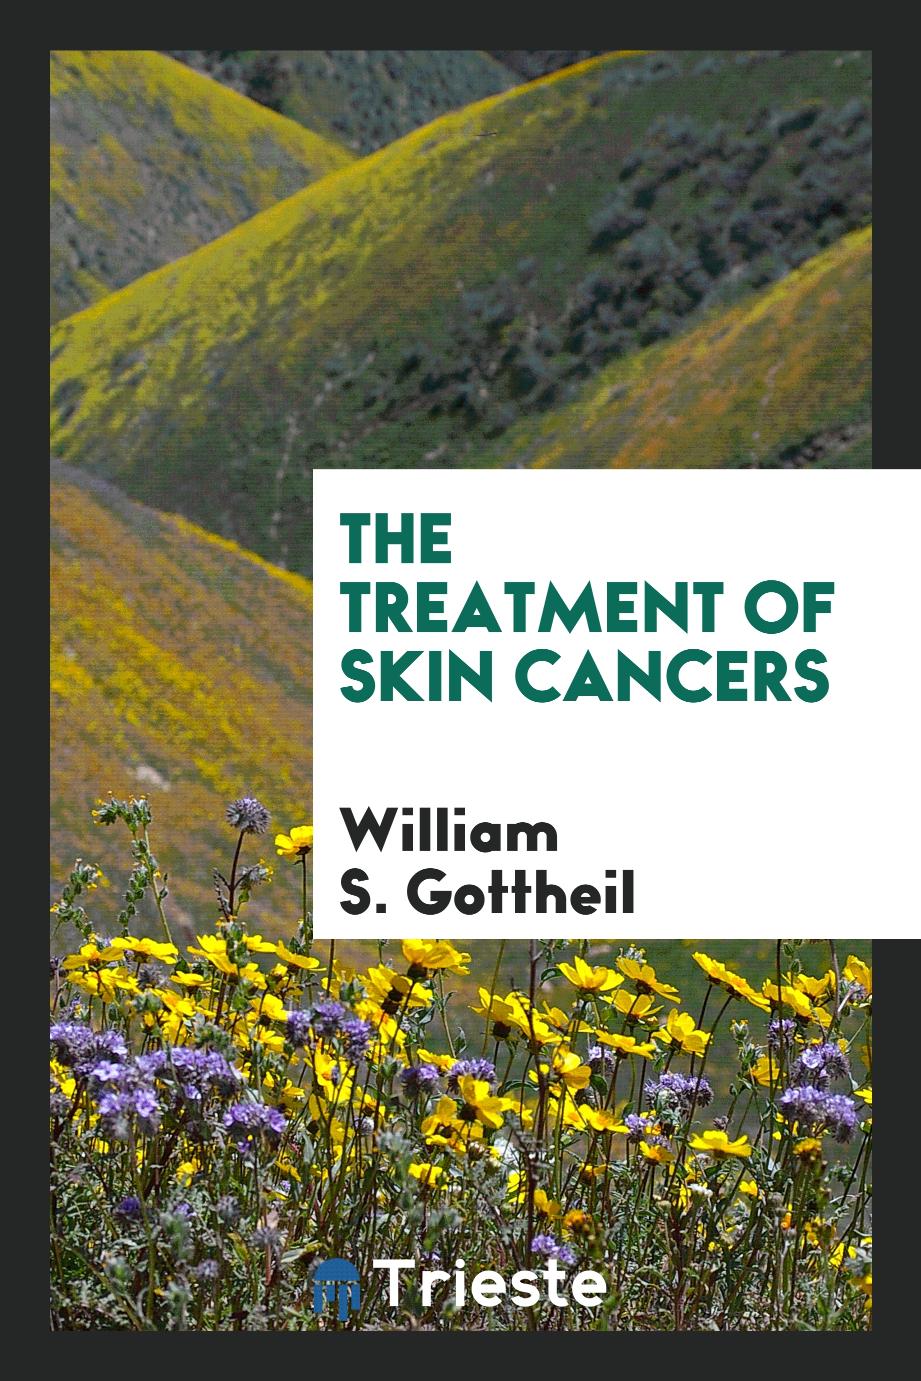 The Treatment of skin cancers